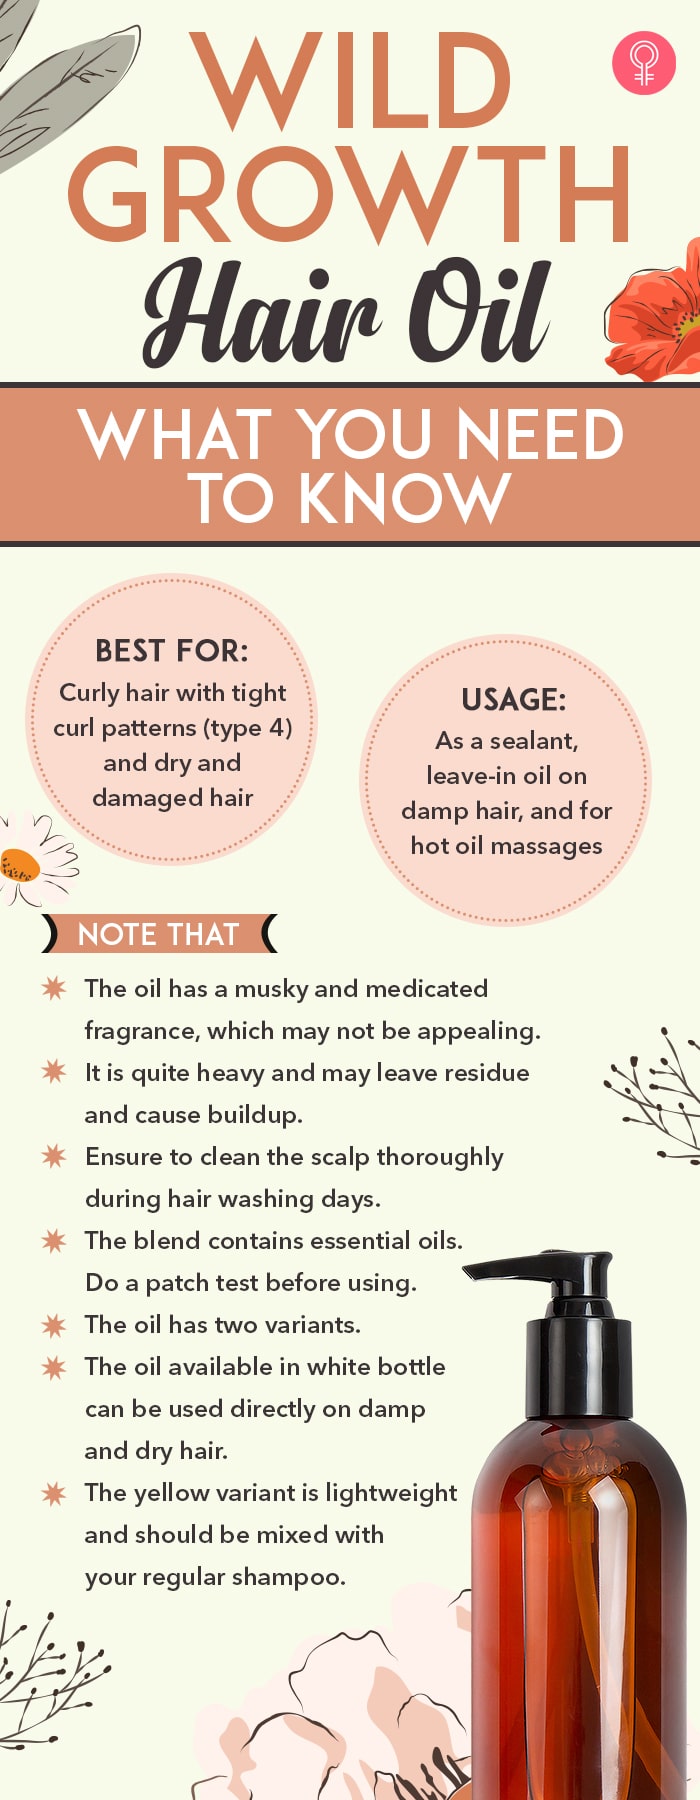 Wild-Growth-Hair-Oil-What-You-Need-To-Know